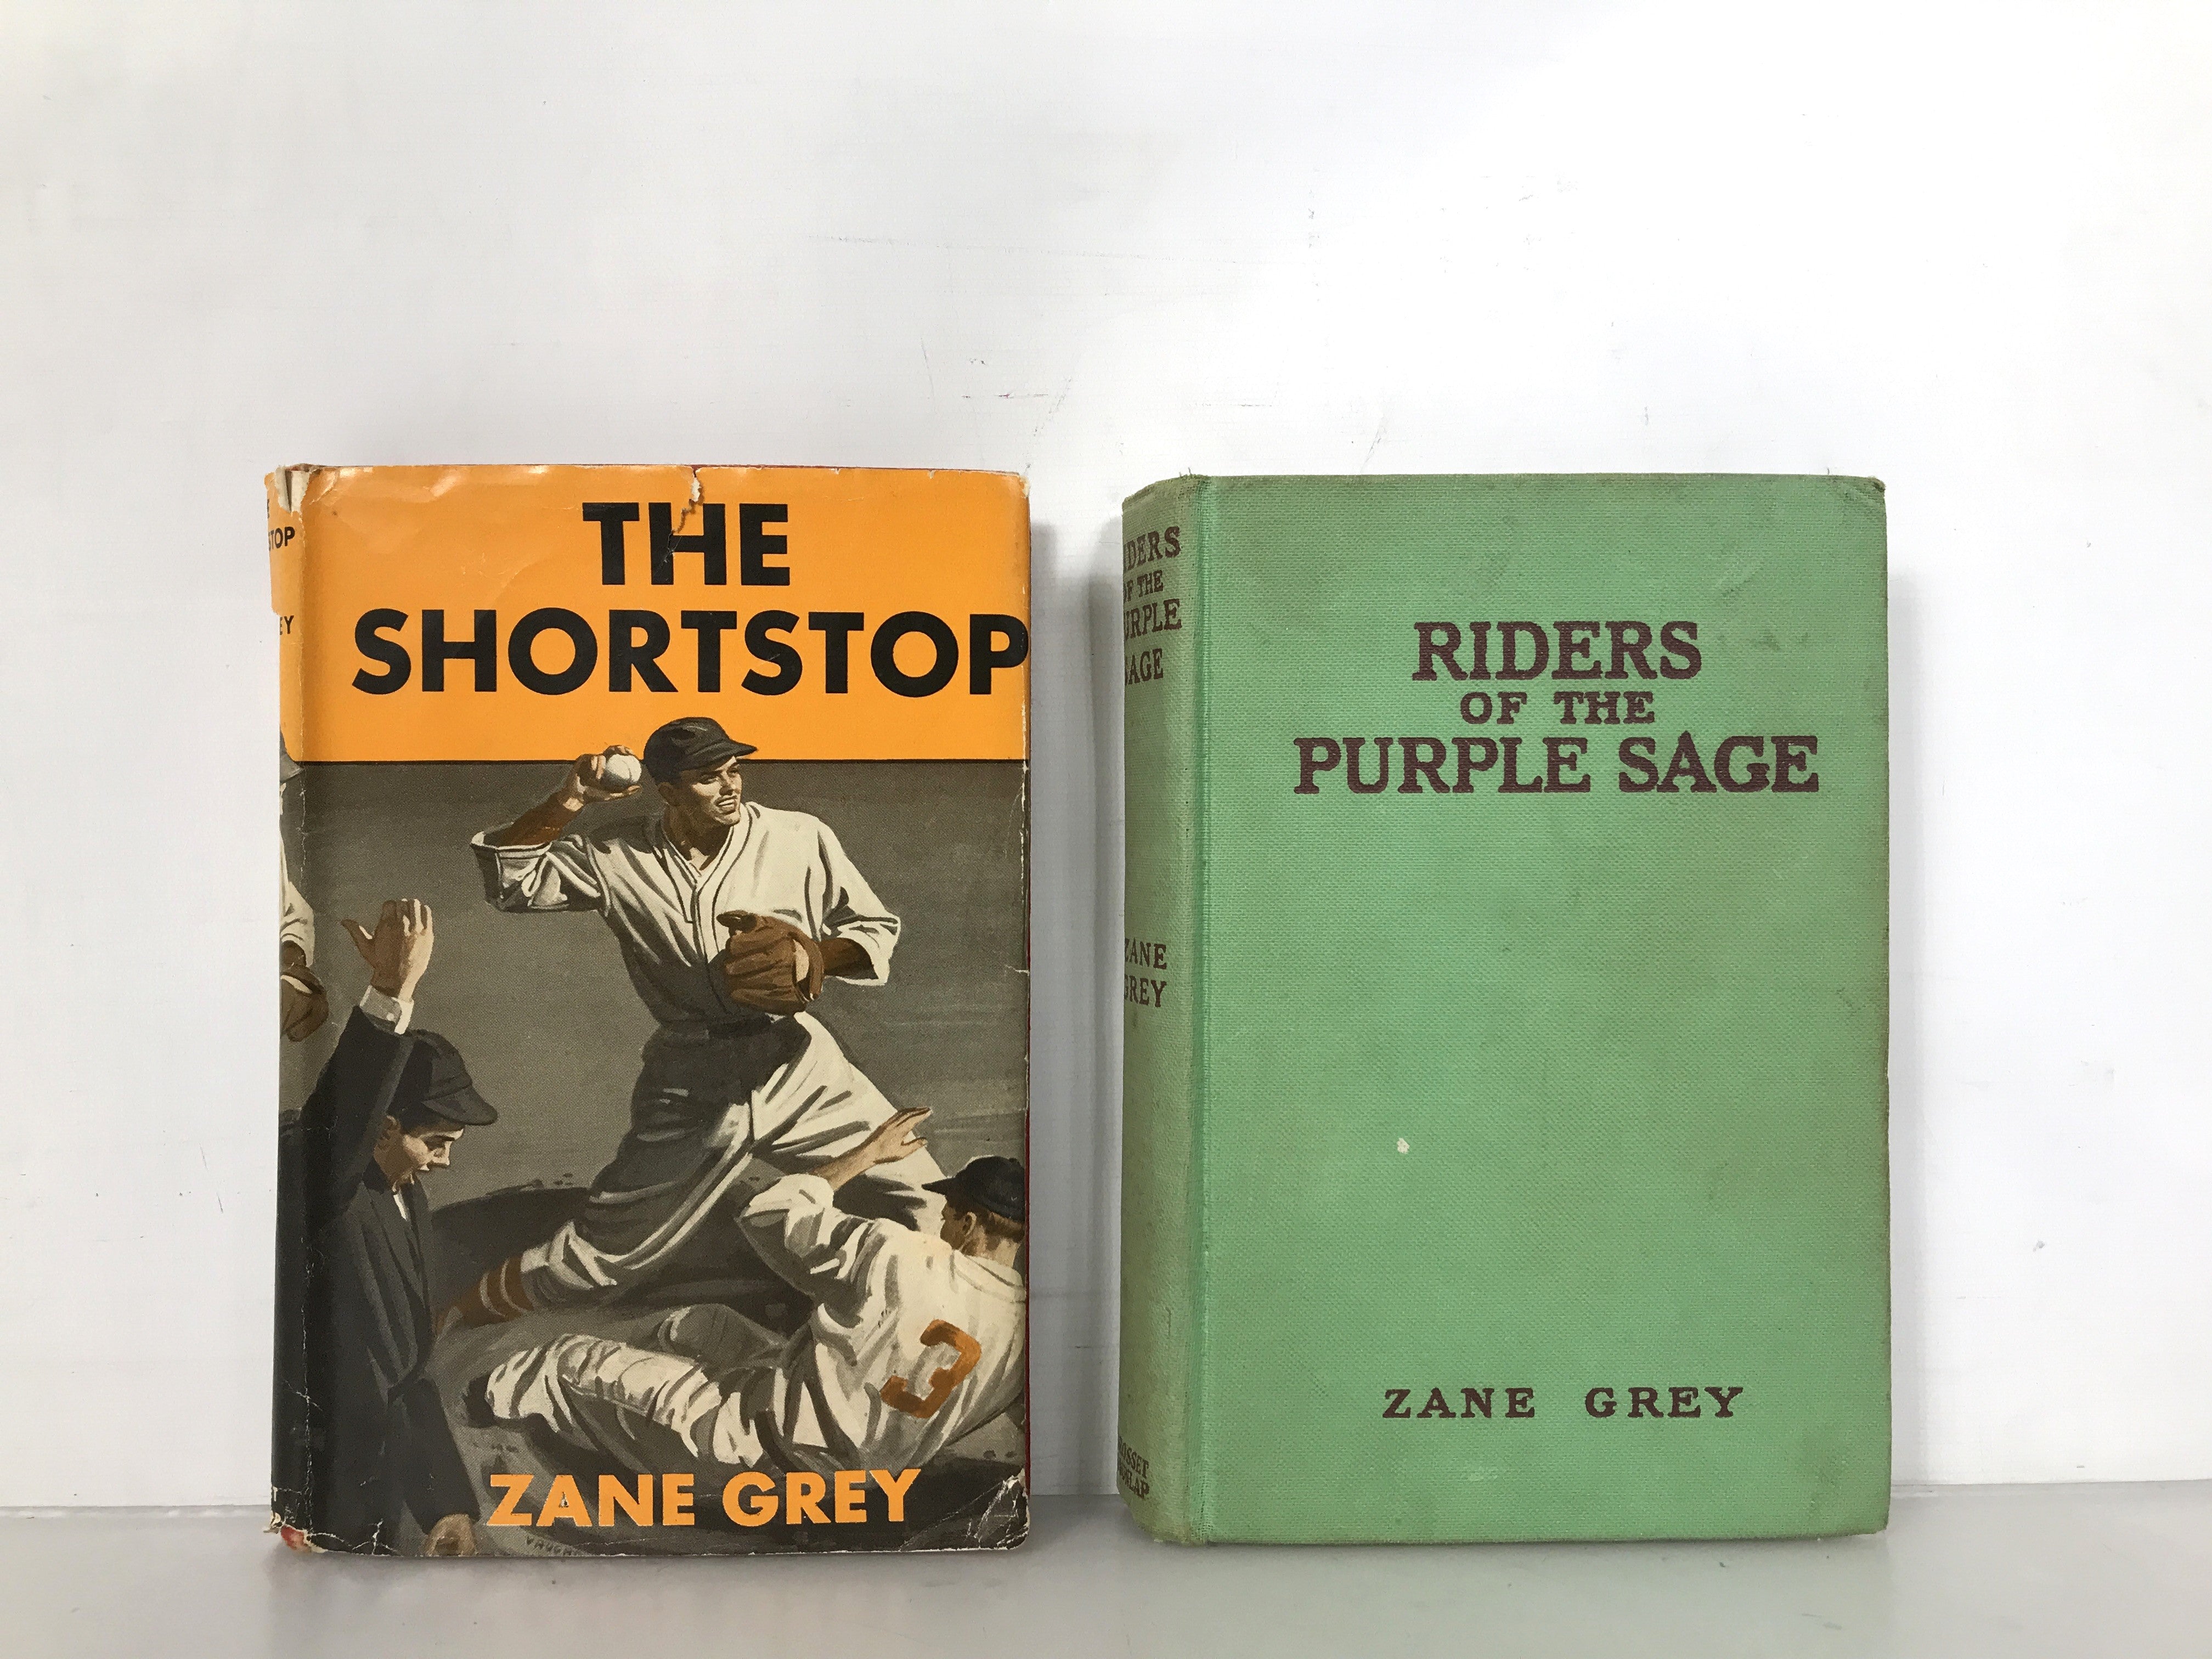 Lot of 2 Vintage Zane Grey Books The Shortstop and Riders of the Purple Sage 1937-1940 HC DJ